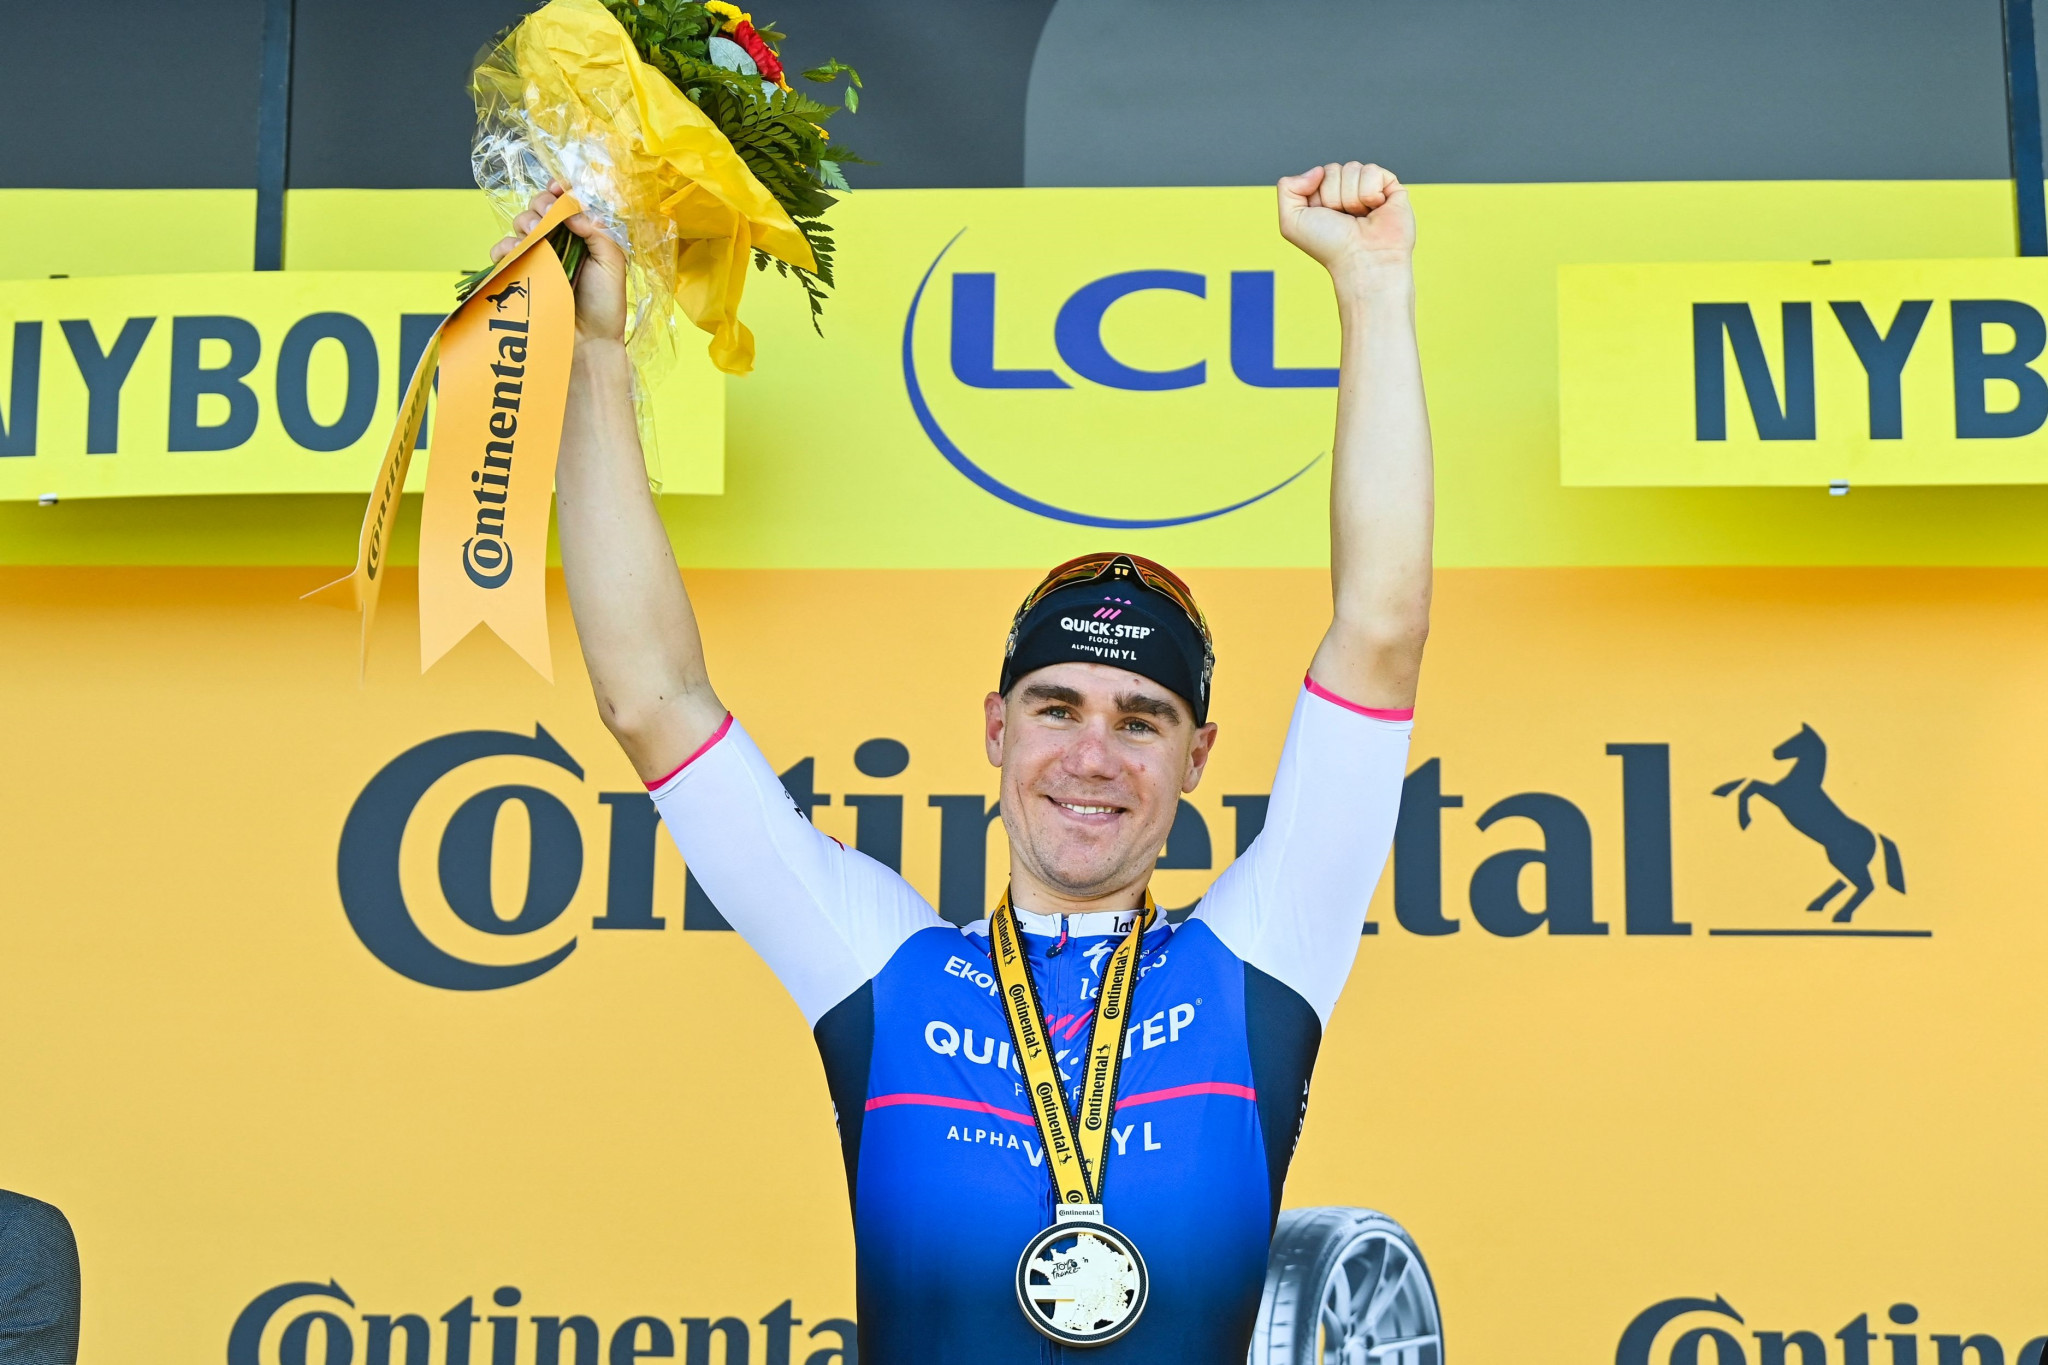 Jakobsen claimed his first Tour de France stage win in his career ©Getty Images